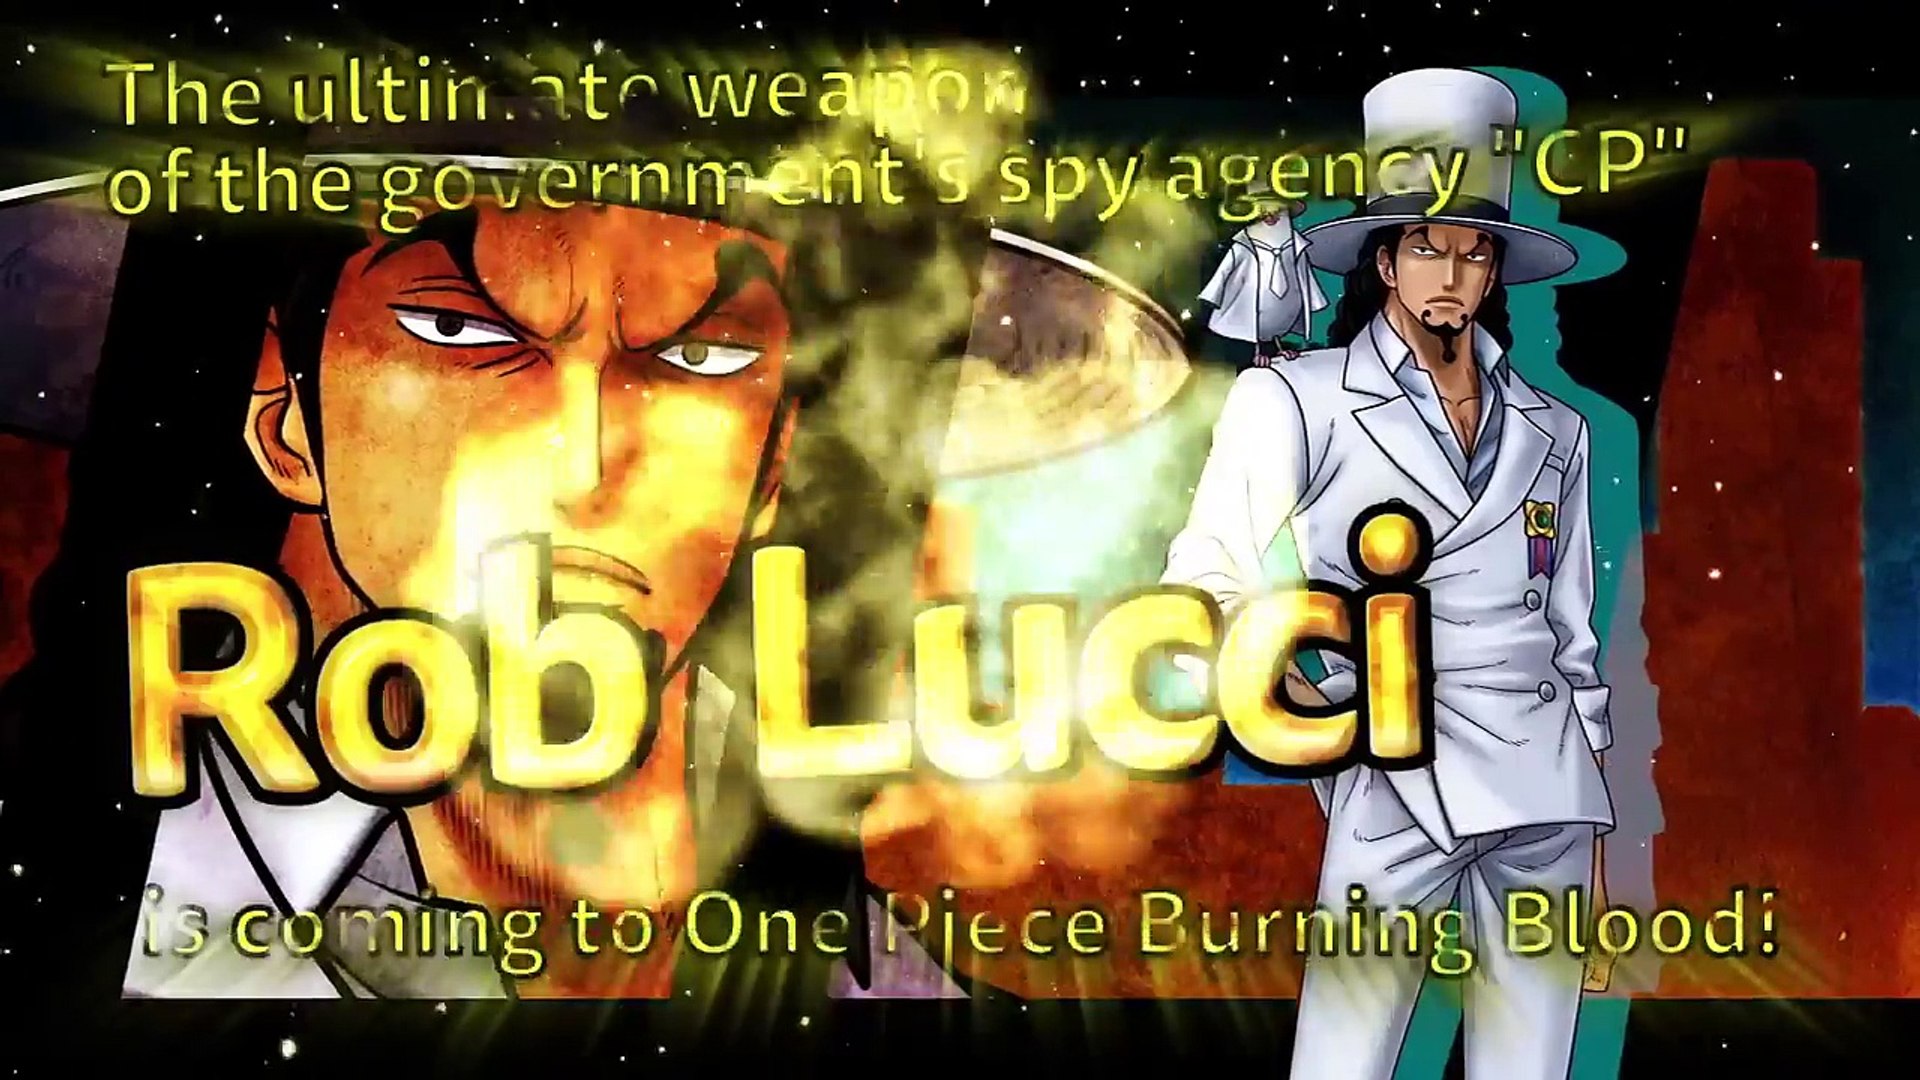 One Piece Burning Blood Dlc Pack 2 Trailer Rob Lucci Playable Character Gameplay Film Gold Costumes Video Dailymotion